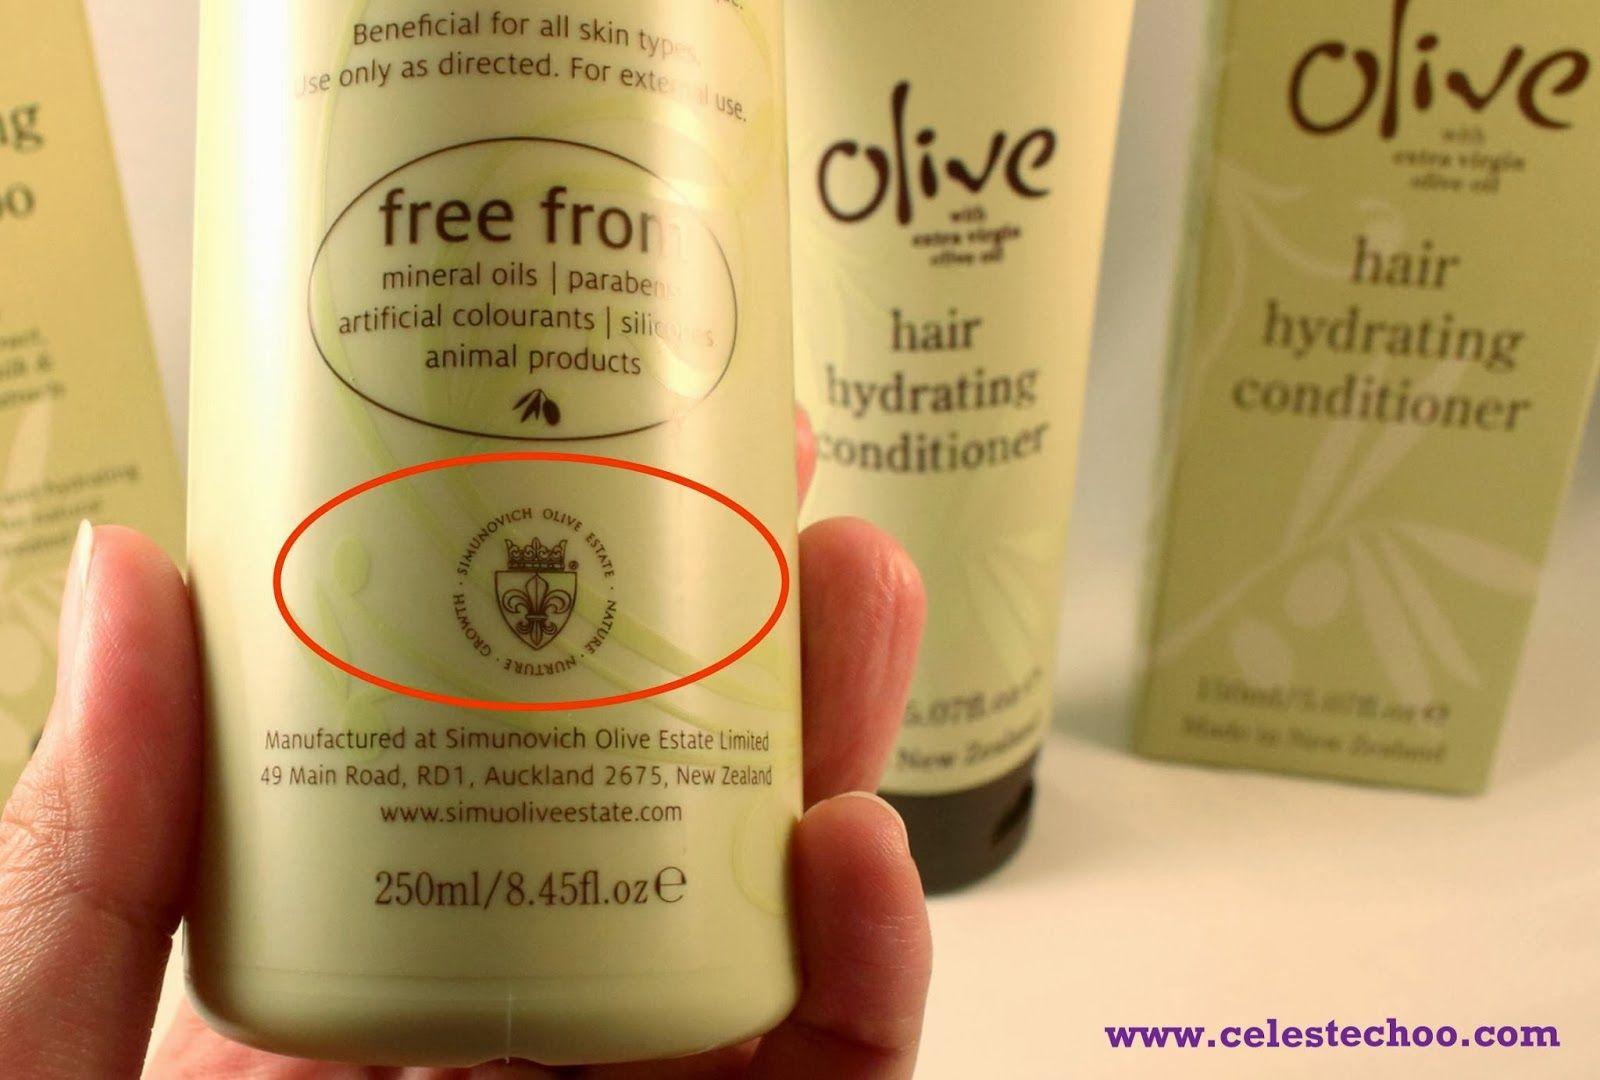 Shampoo Olive Logo - CelesteChoo.com: Healthy Hair with Olive Shampoo & Conditioner from ...